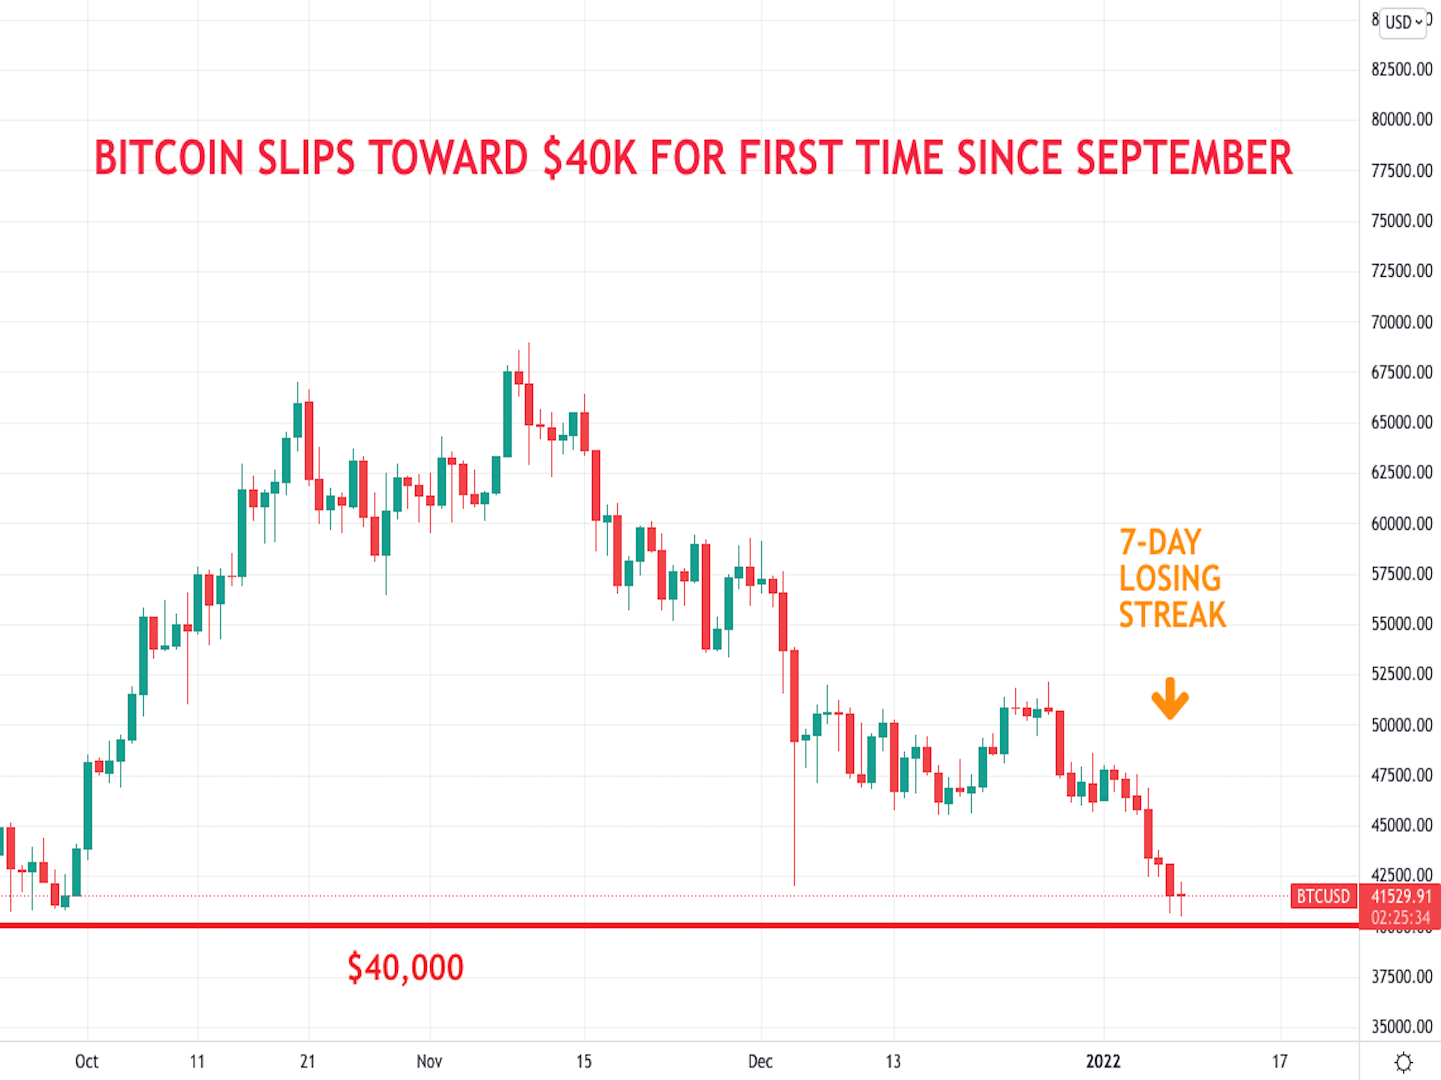 Bitcoin falls to $ 40,000, picking up the longest losing streak since 2018